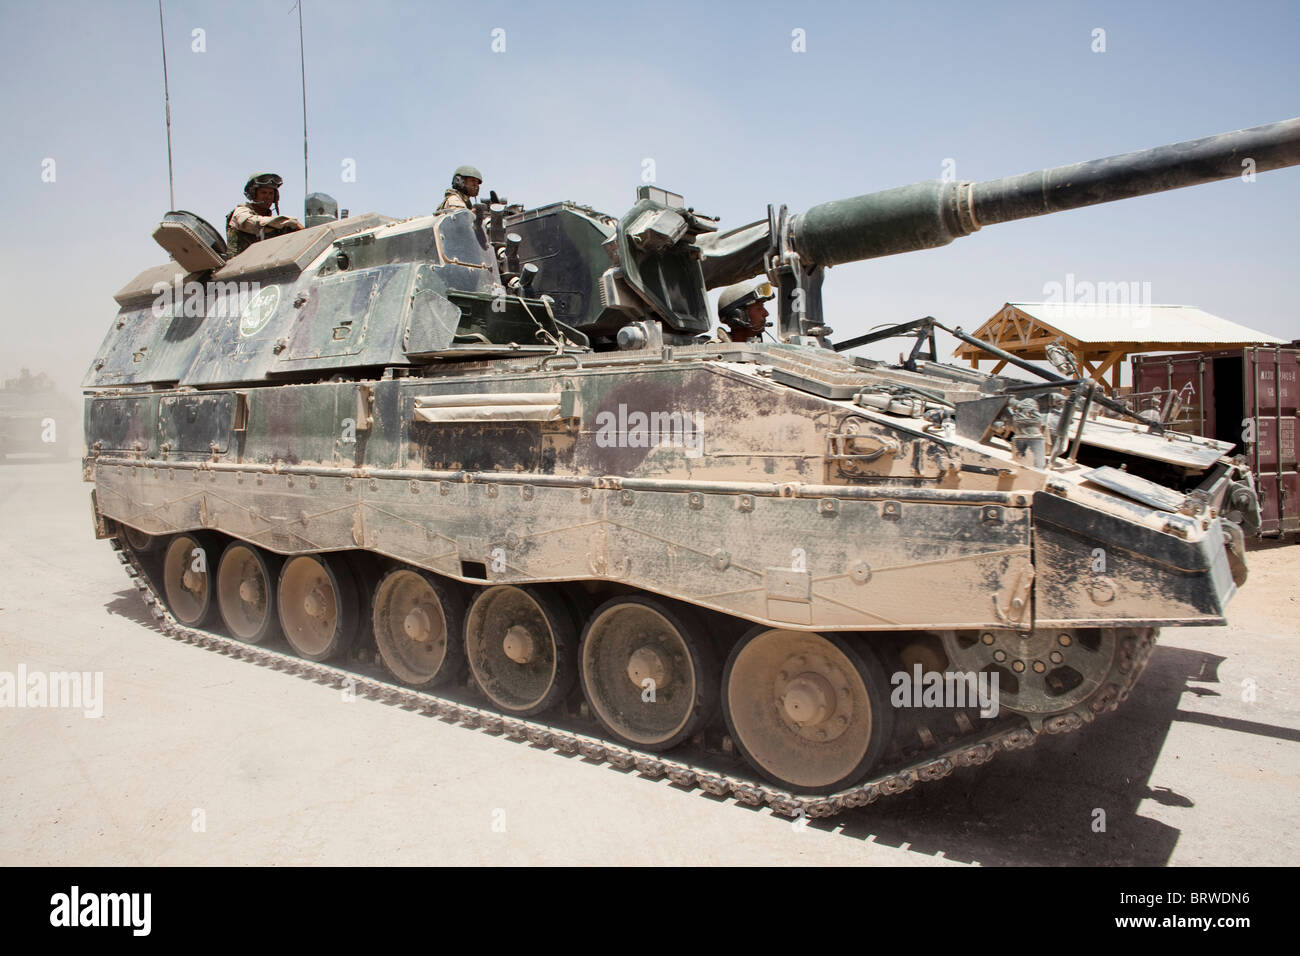 Howitser tank (ISAF) in Afghanistan Stock Photo